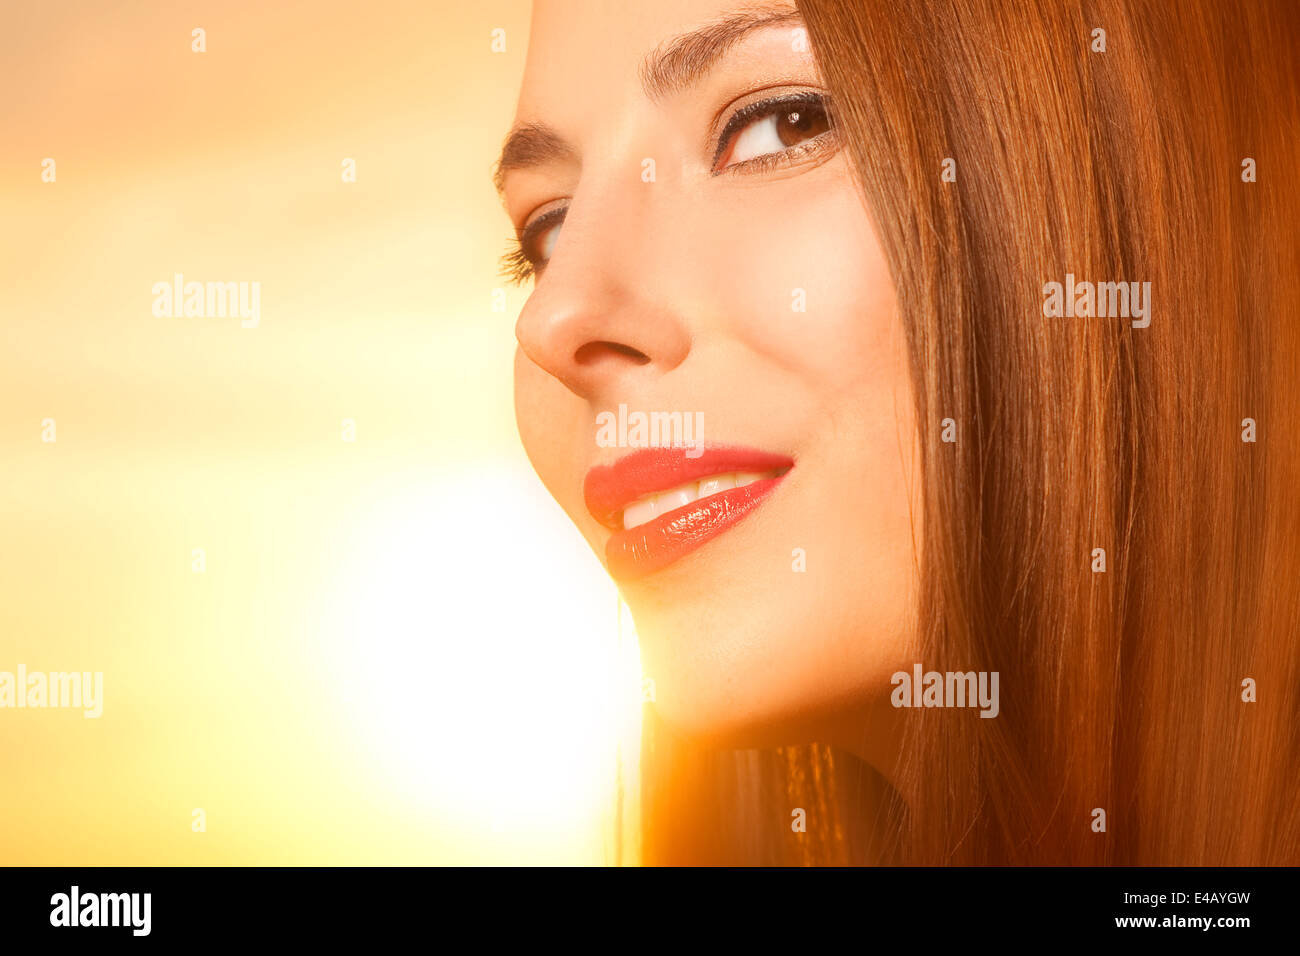 Belle, happy young woman in sunlight Banque D'Images